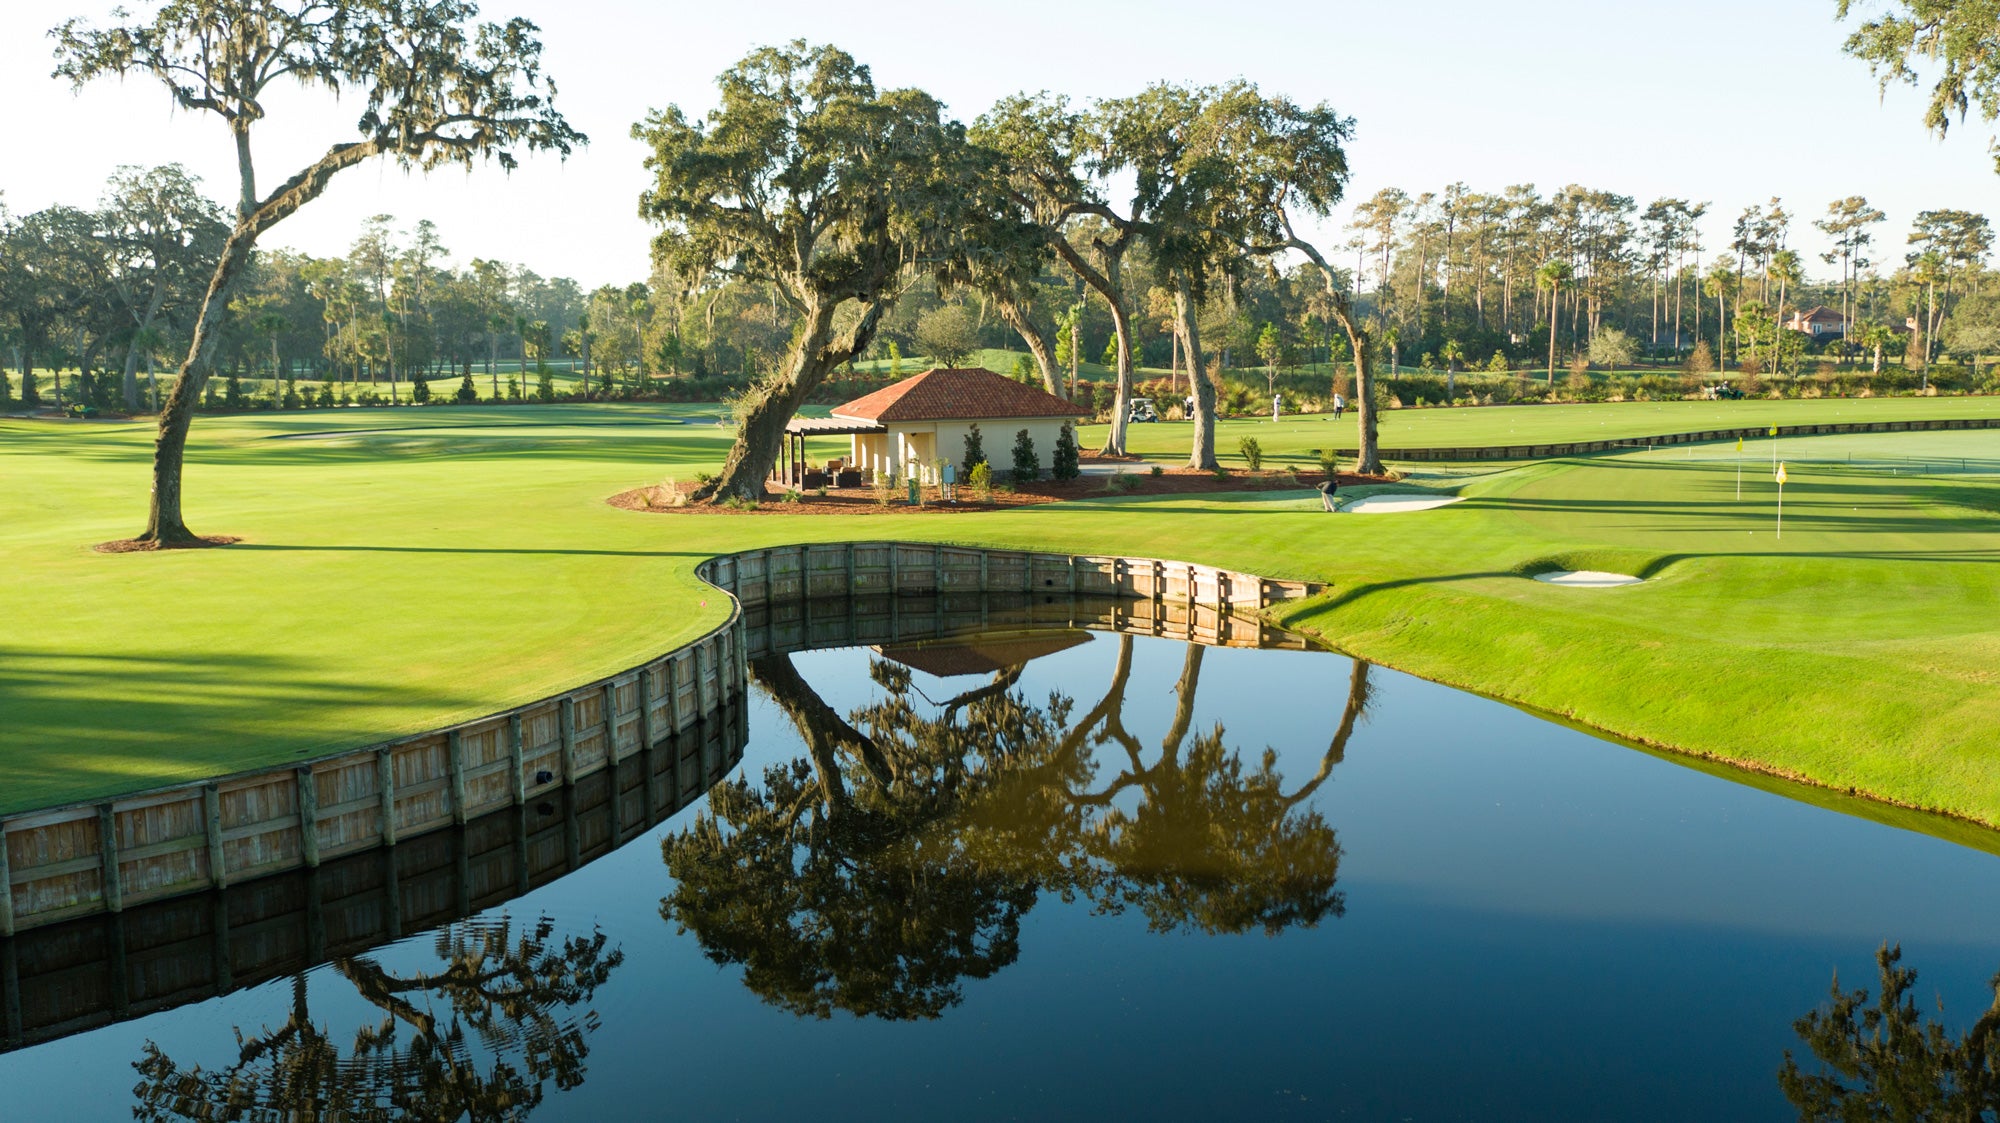 Inside the innovative new practice facility at TPC Sawgrass